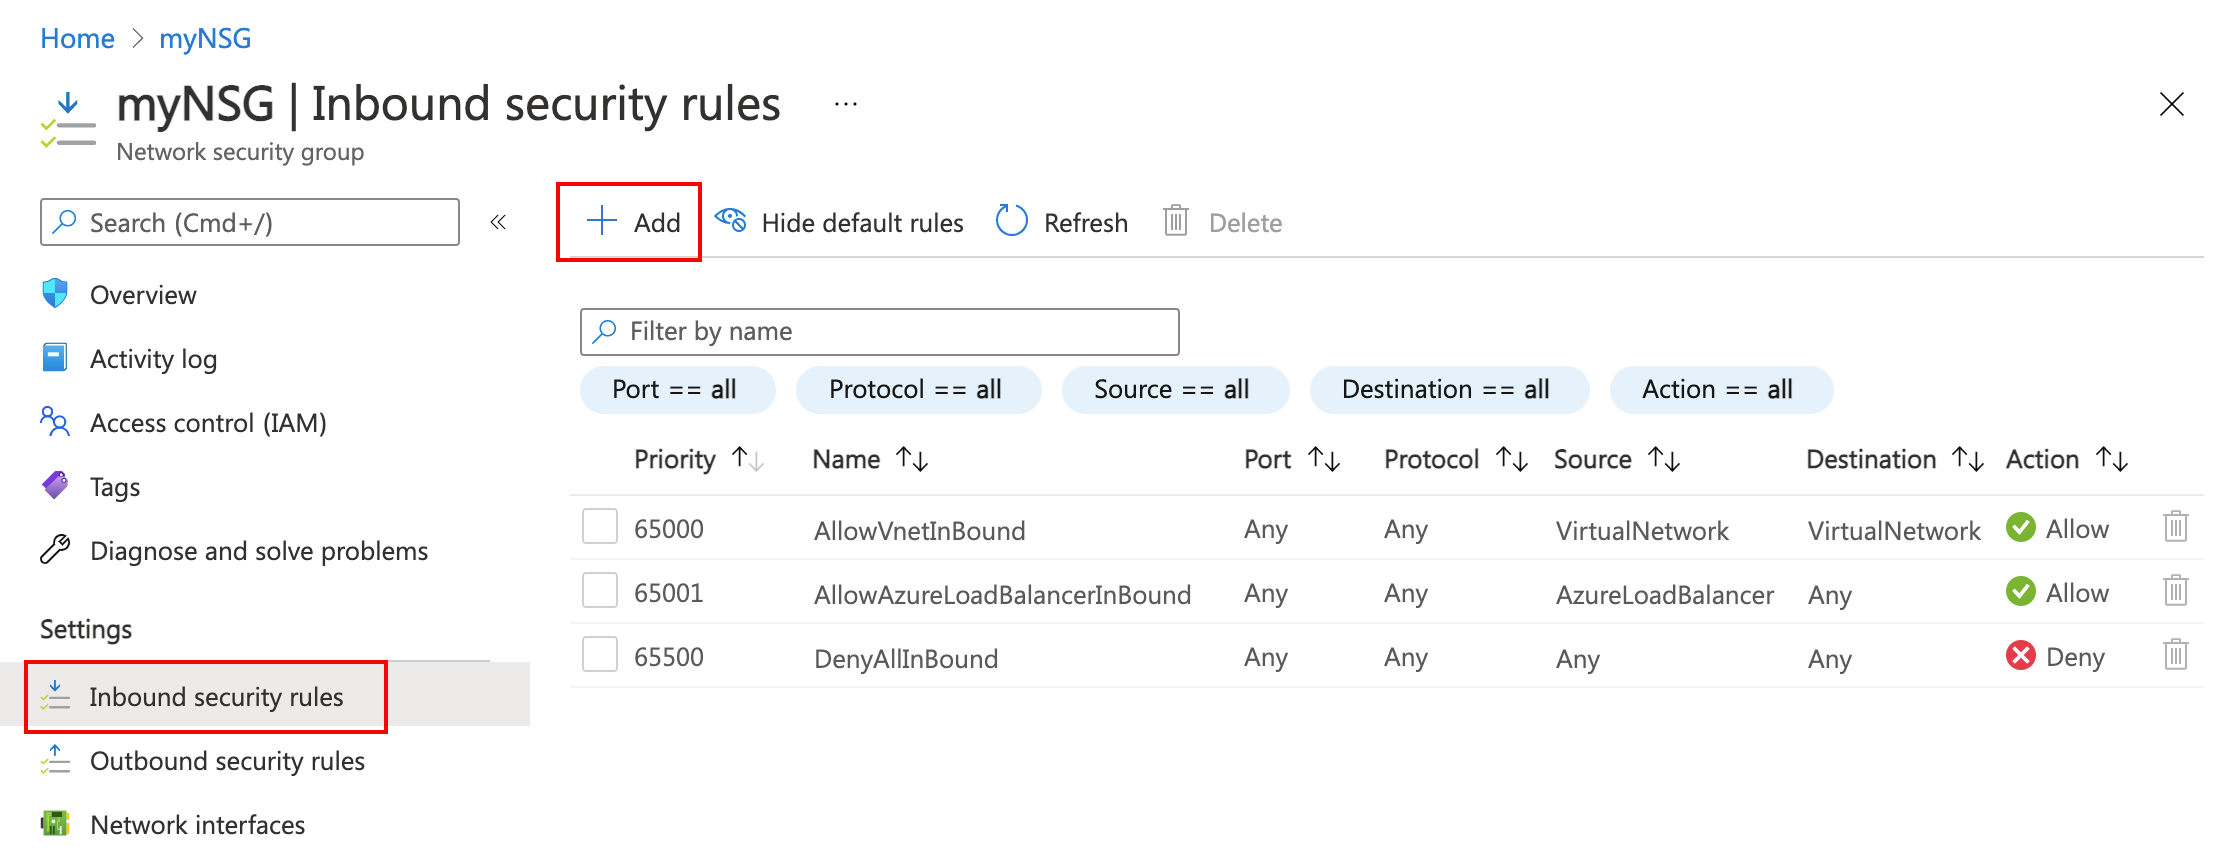 Screenshot of Inbound security rules in a network security group.